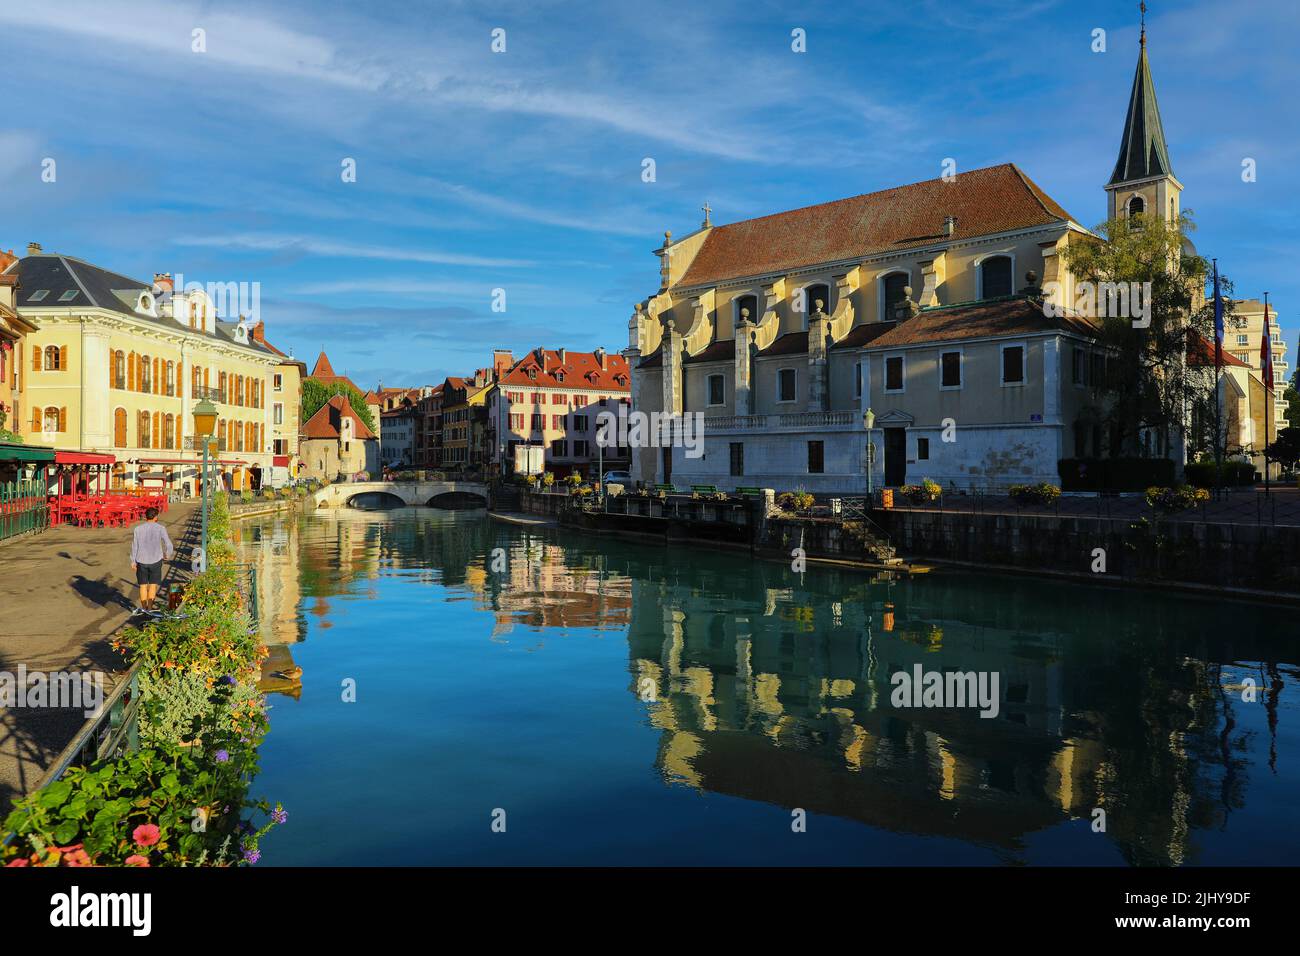 Colourful medieval buildings reflected on water of the canal in Annecy, France Stock Photo